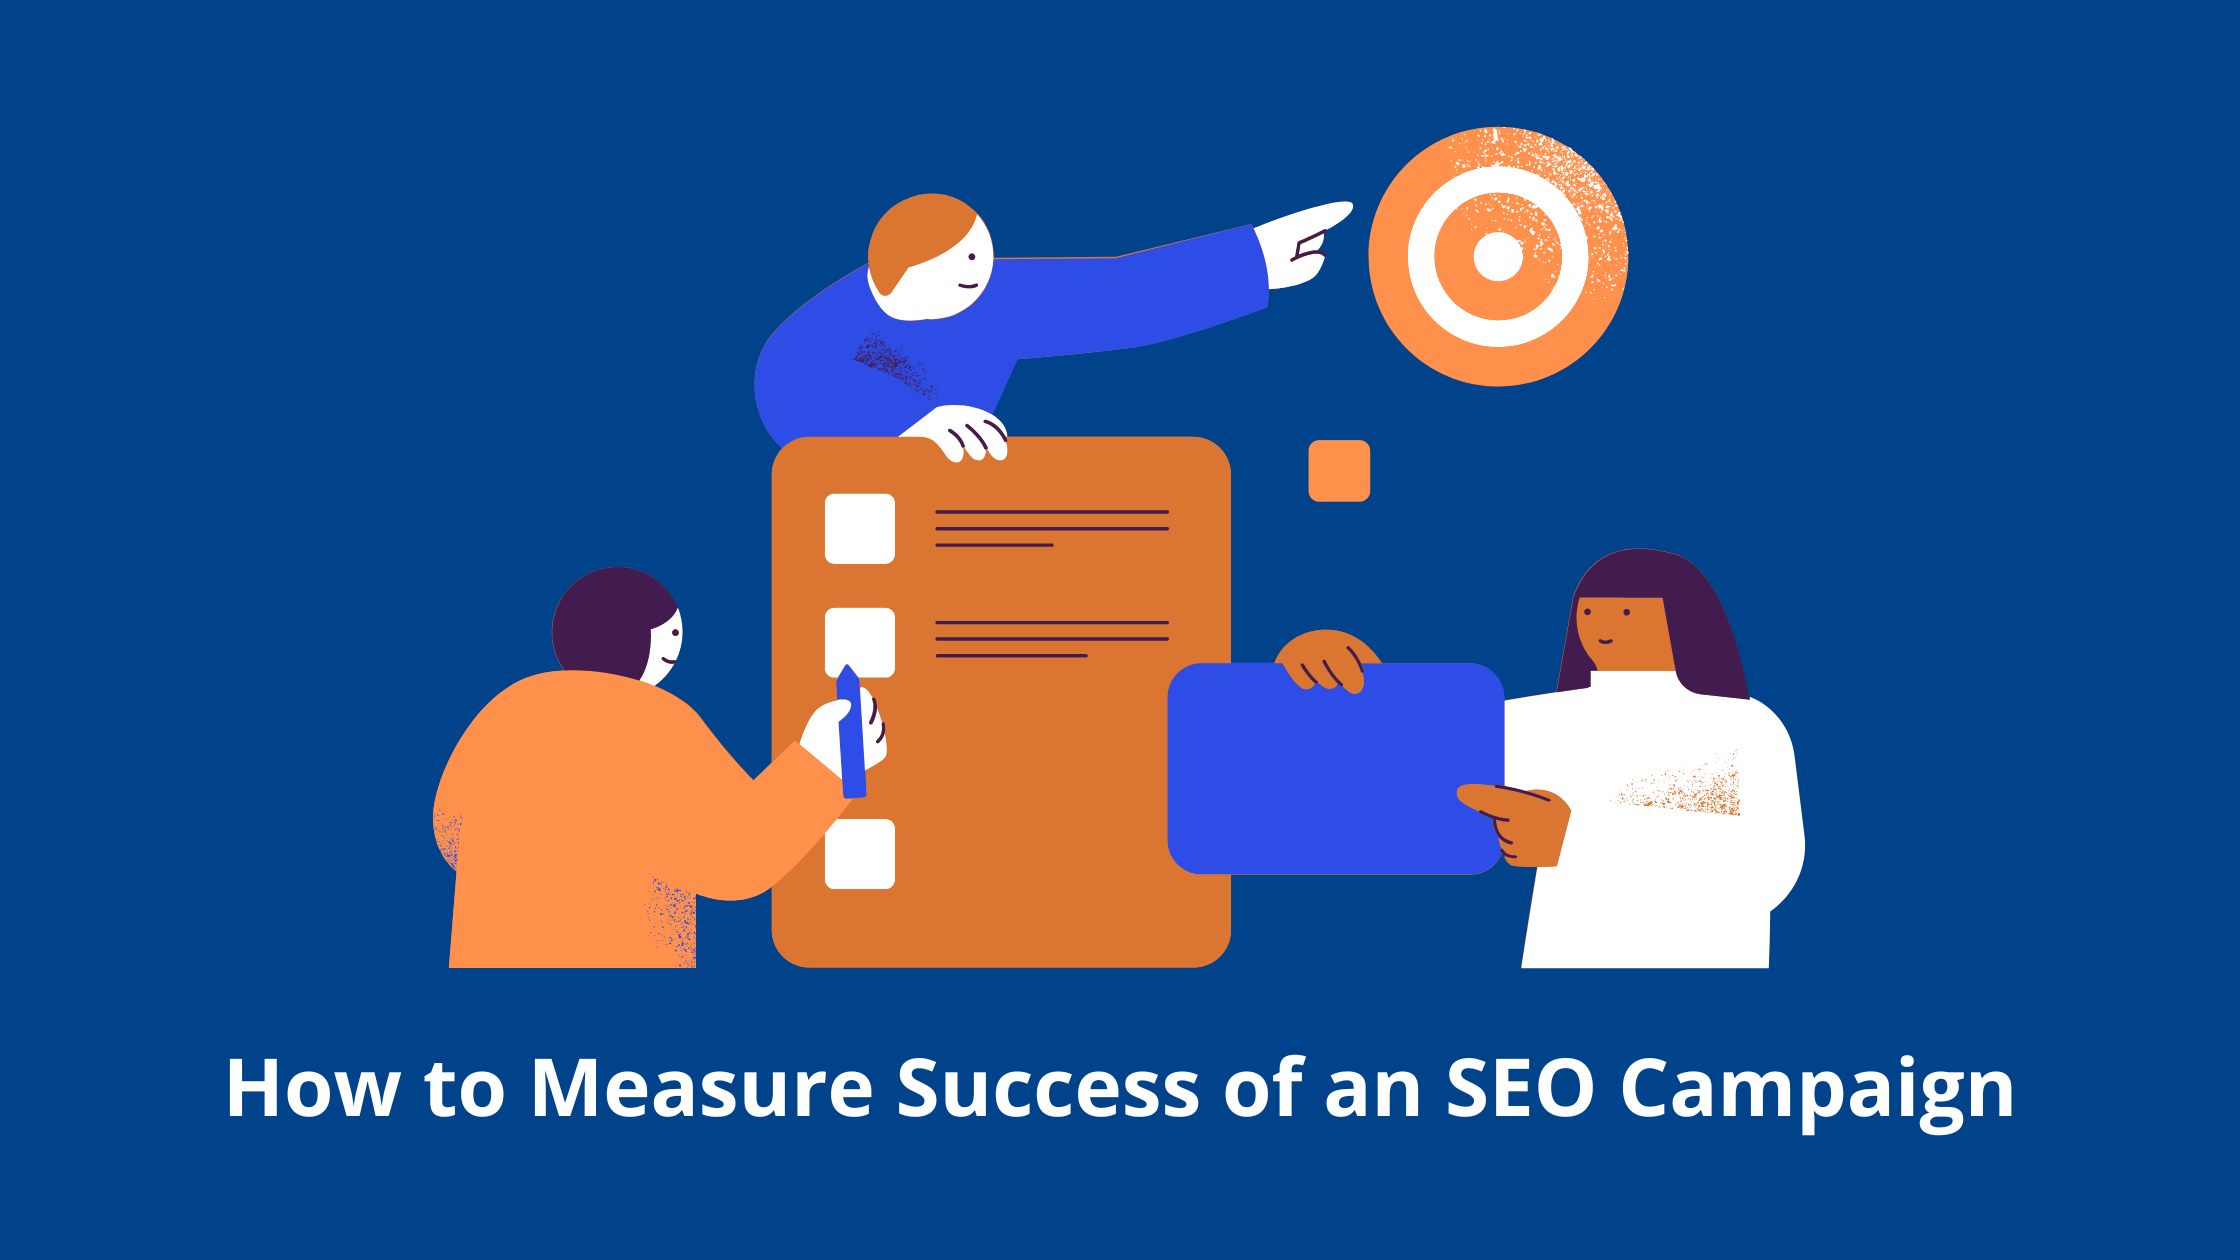 How to Measure the Success of an SEO Campaign